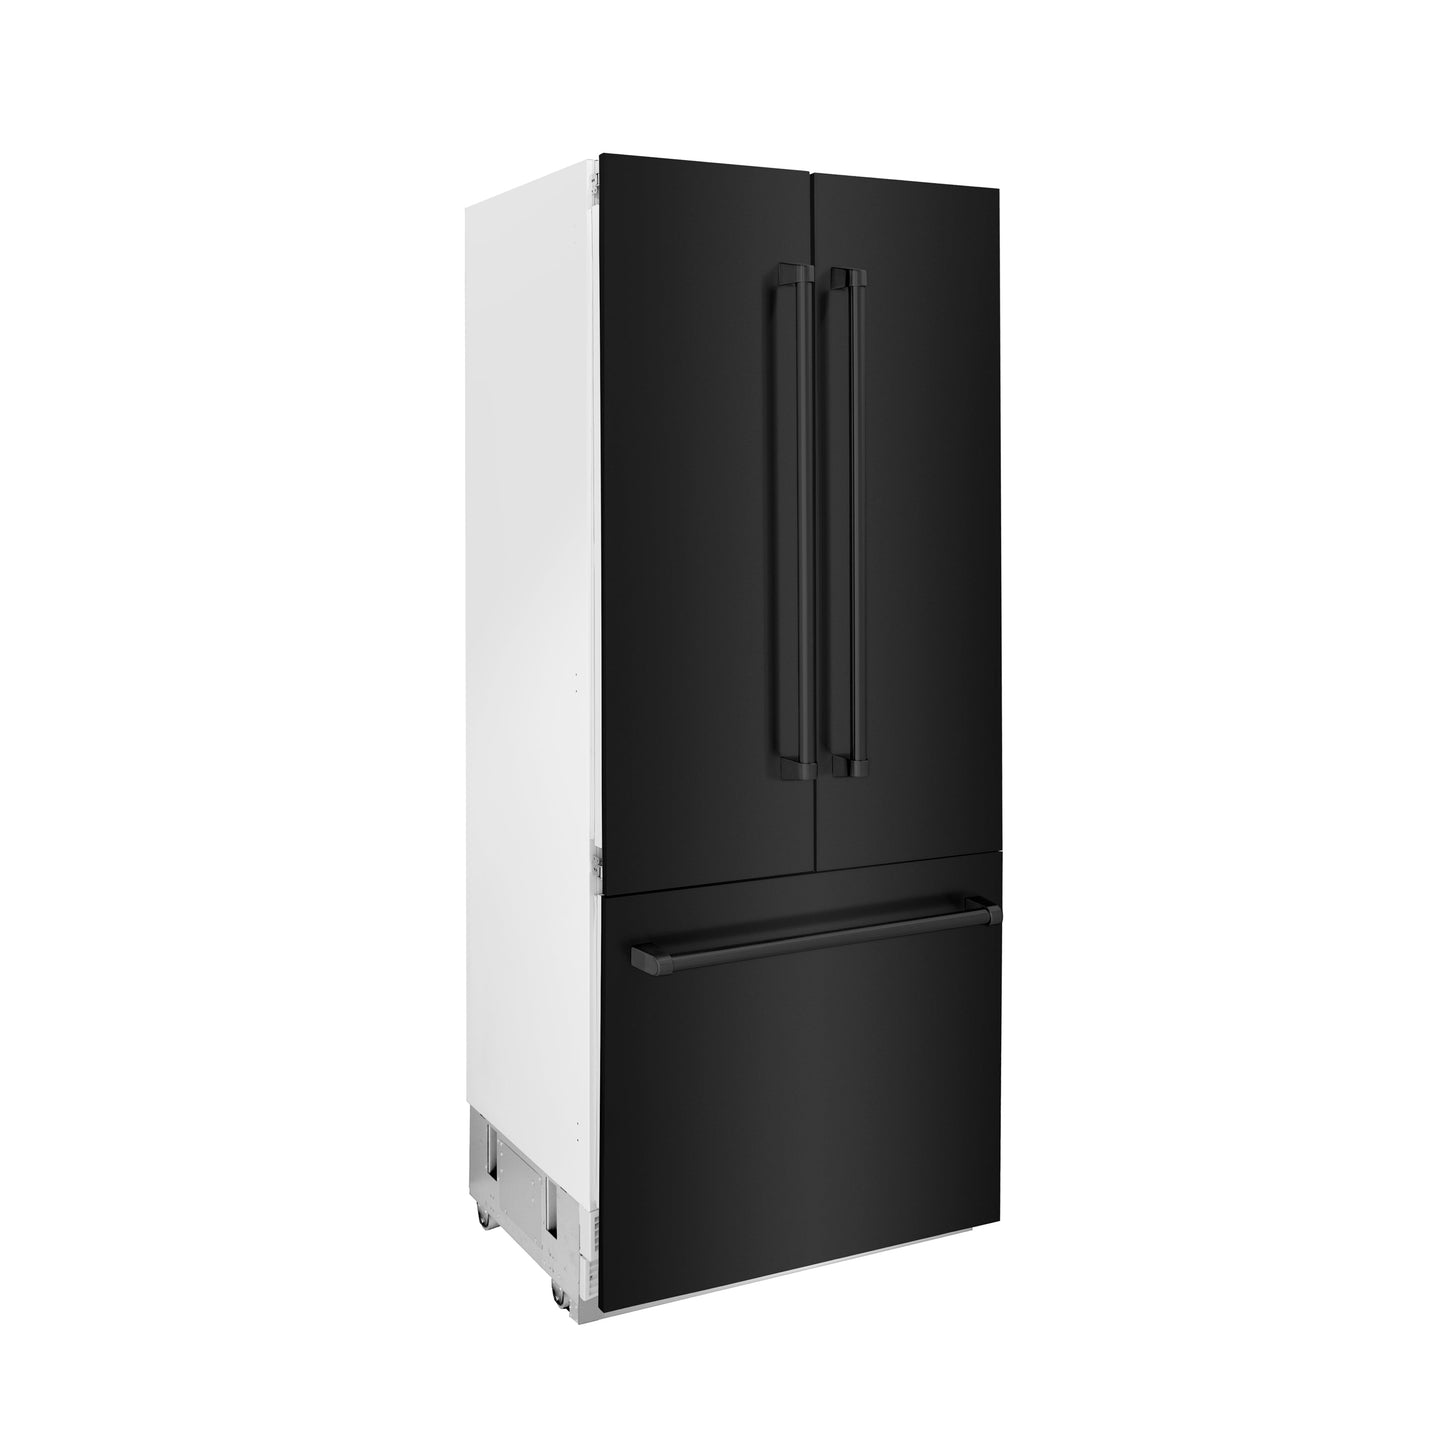 ZLINE 36" 19.6 cu. ft. Built-In Refrigerator with Internal Water and Ice Dispenser in Black Stainless Steel, RBIV-BS-36